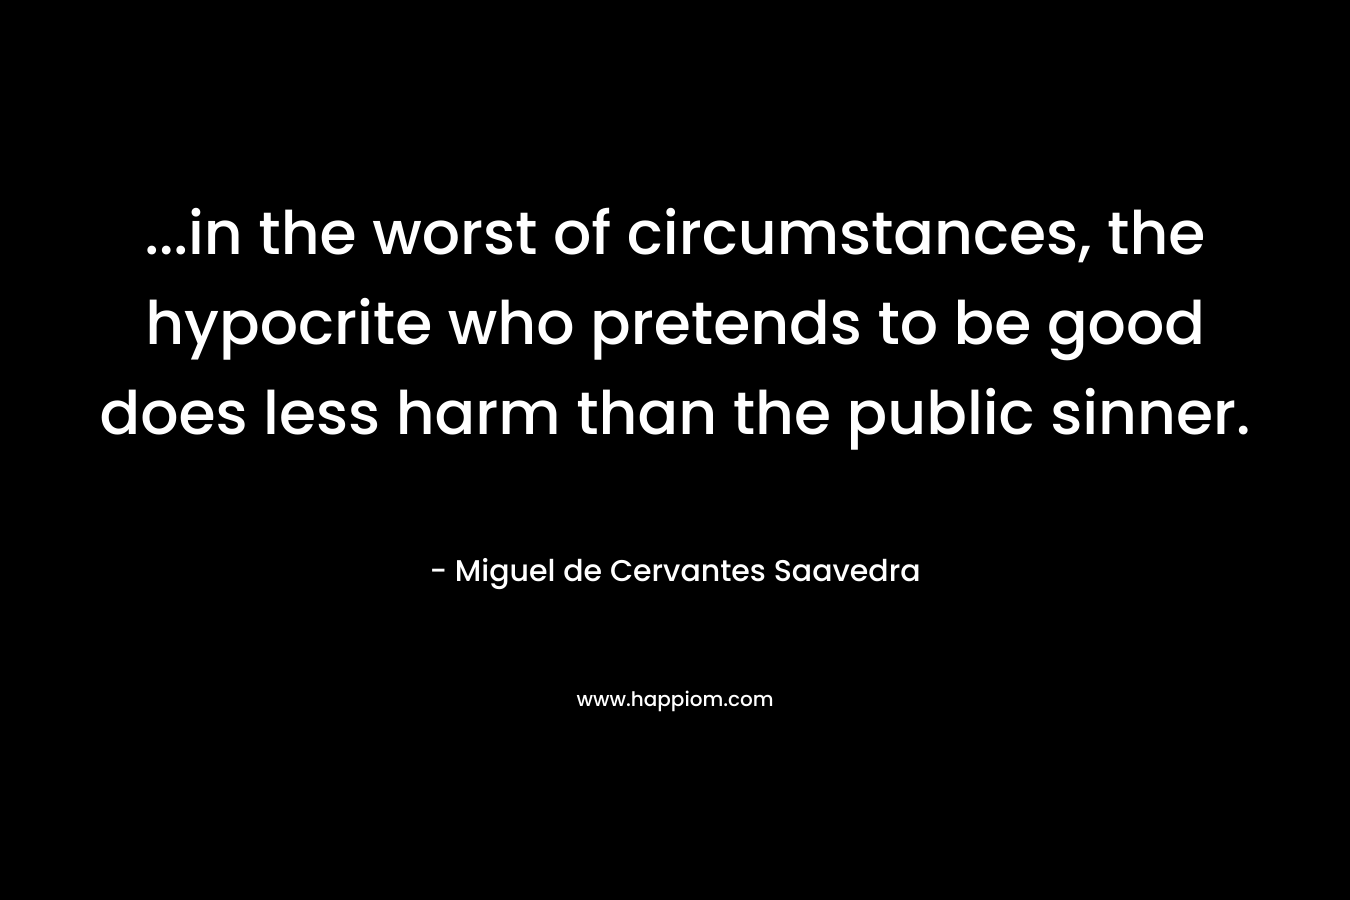 …in the worst of circumstances, the hypocrite who pretends to be good does less harm than the public sinner. – Miguel de Cervantes Saavedra